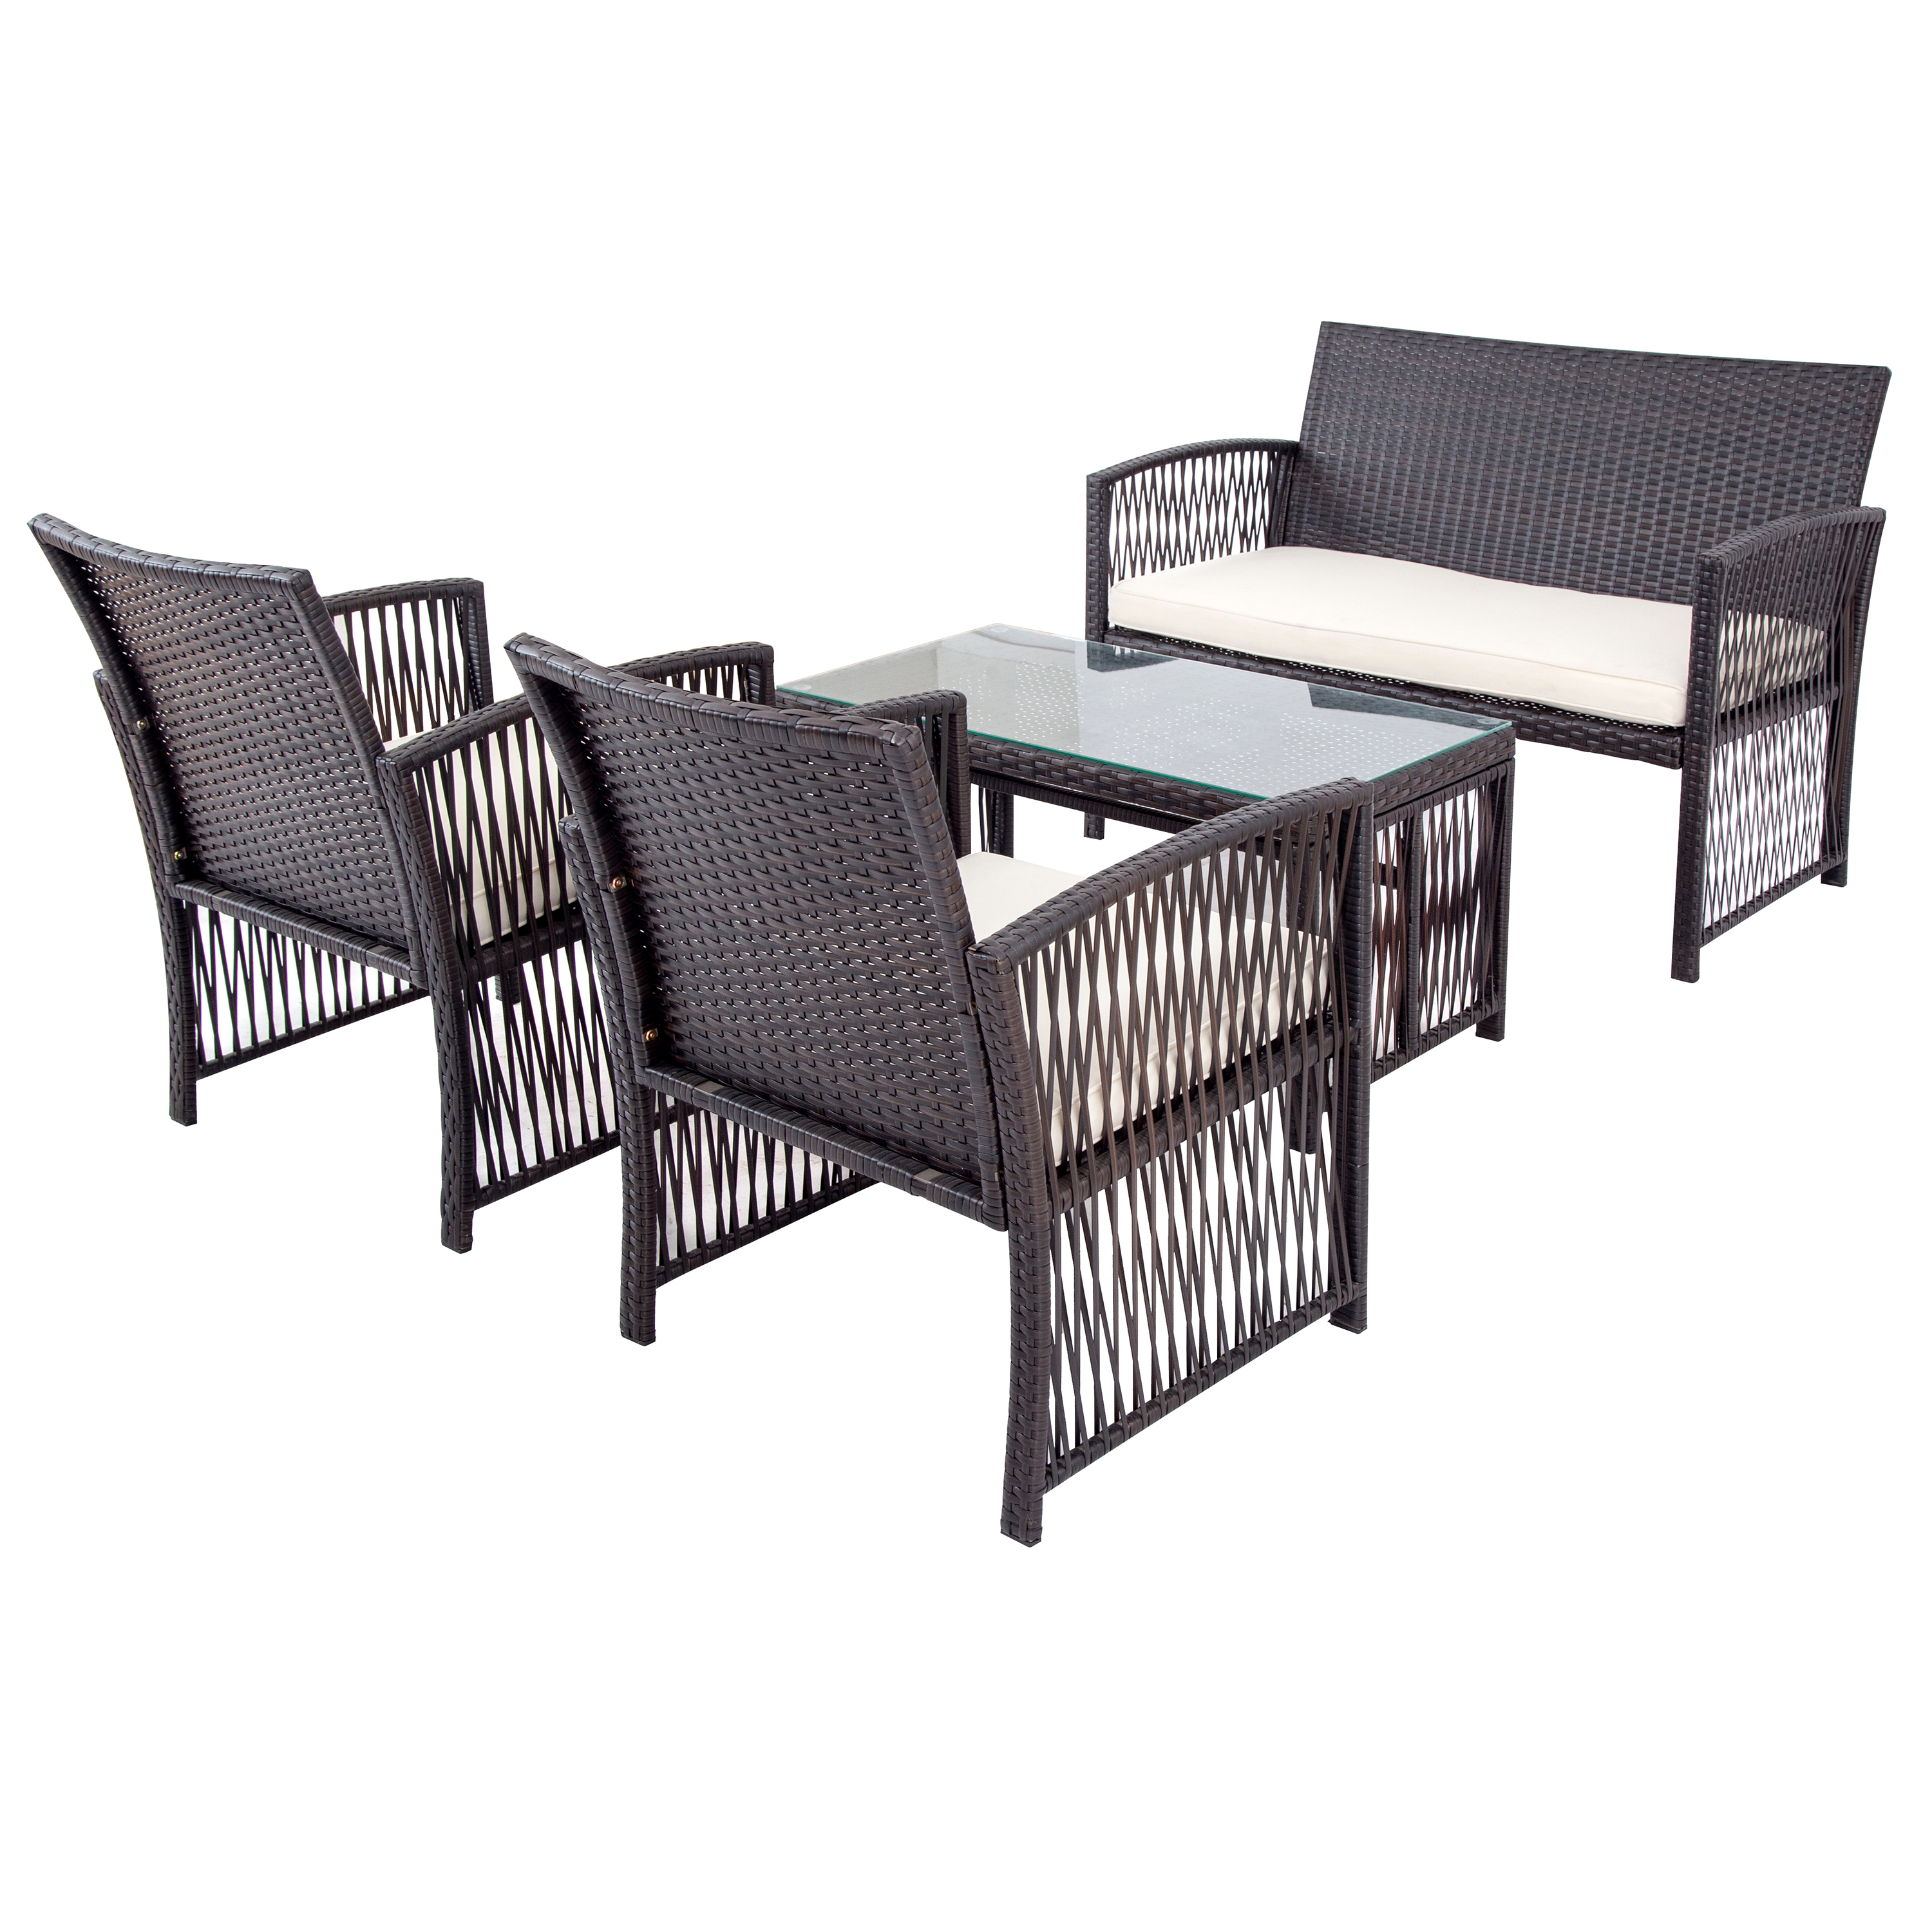 4-Piece Patio Furniture Sets in Patio & Garden, Outdoor Wicker Sofa PE Rattan Chair Garden Conversation Set, Patio Set for Backyard with 2 Single Sofa, 1 Loveseat, Tempered Glass Table, Q16554 - image 5 of 13